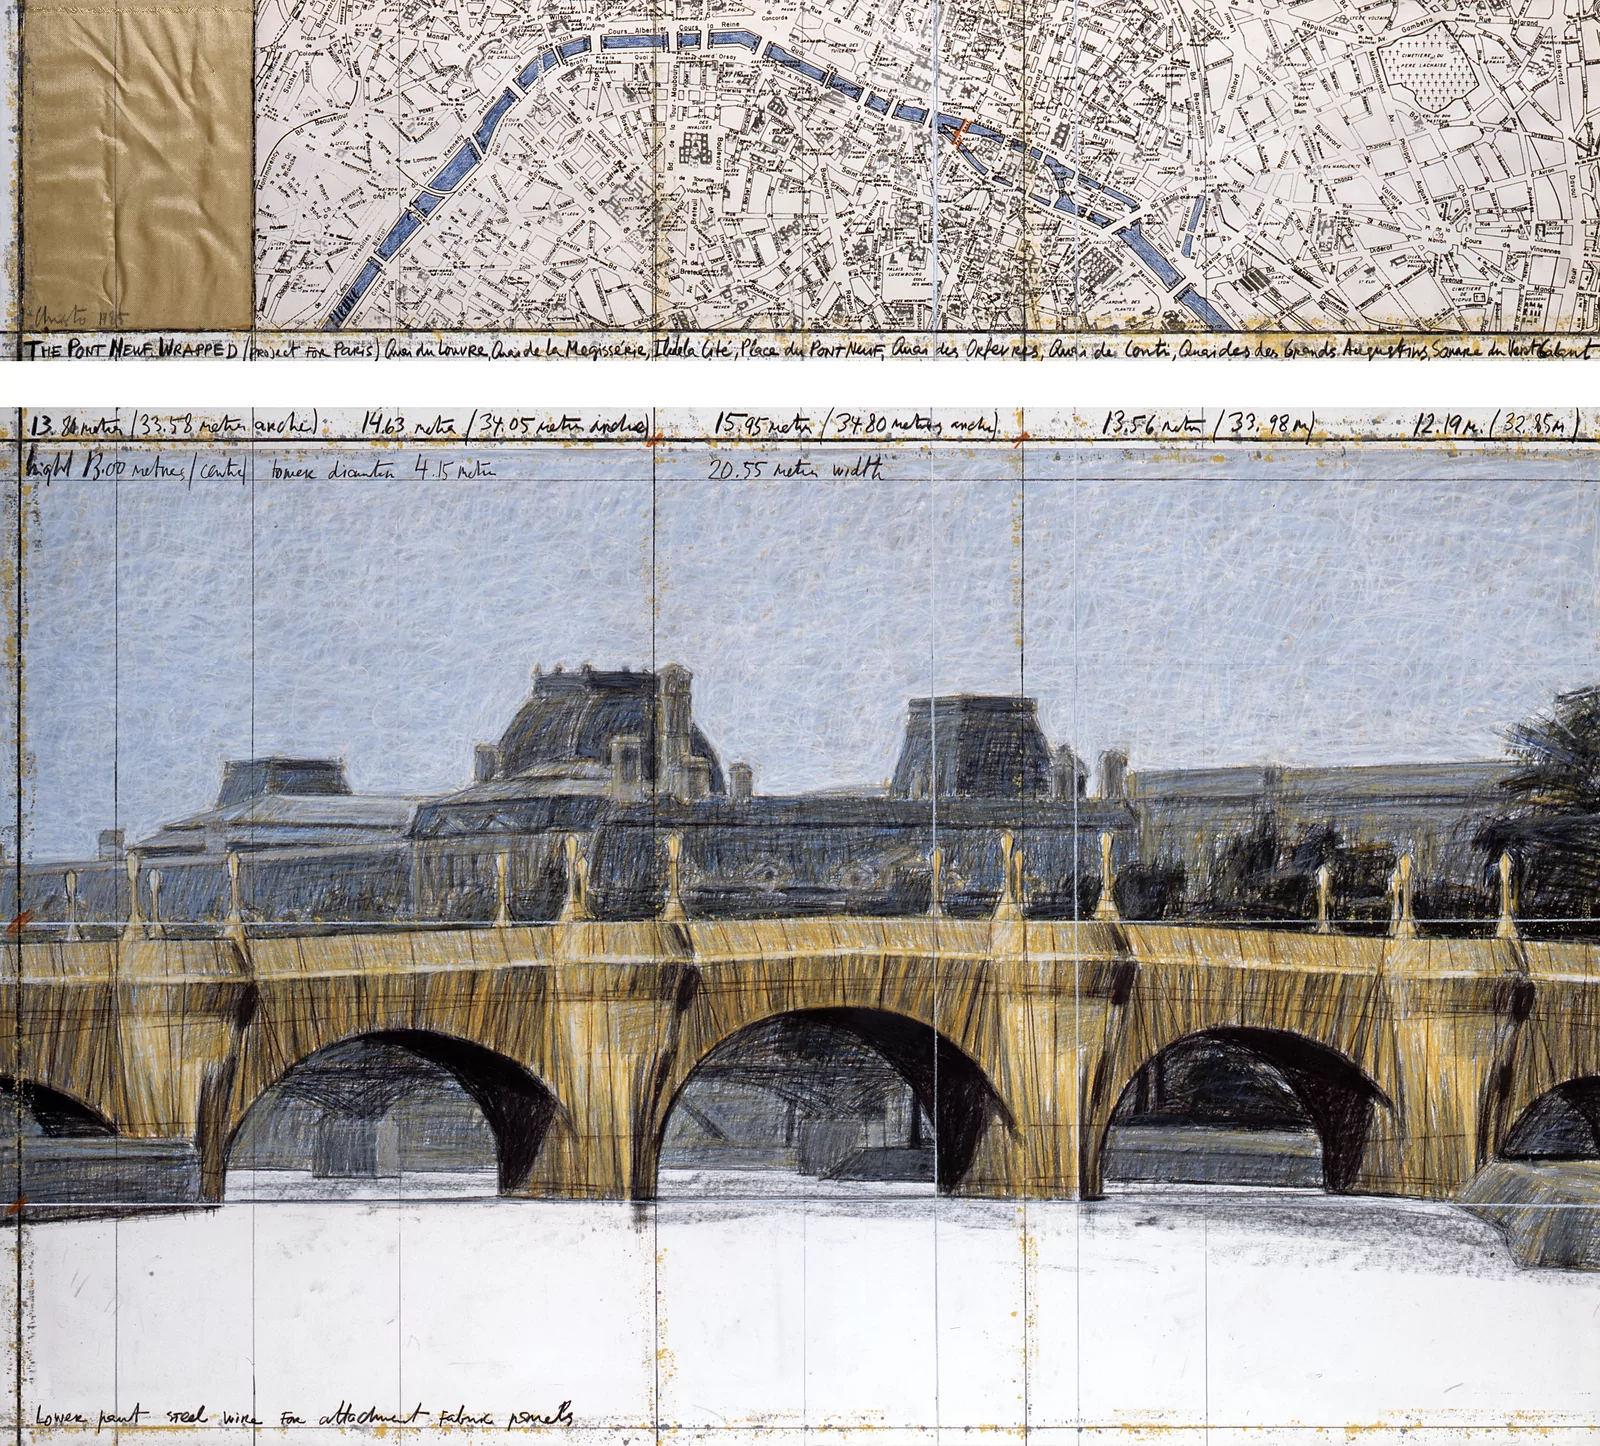 Christo The Pont Neuf Wrapped (Project for Paris) Drawing 1985 in two parts Pencil, charcoal, wax crayon, map, and fabric sample 38 x 165 cm and 106.6 x 165 cm (15 x 65 in and 42 x 65 in) — Private collection Photo: Wolfgang Volz © 1985 Christo and Jeanne-Claude Foundation